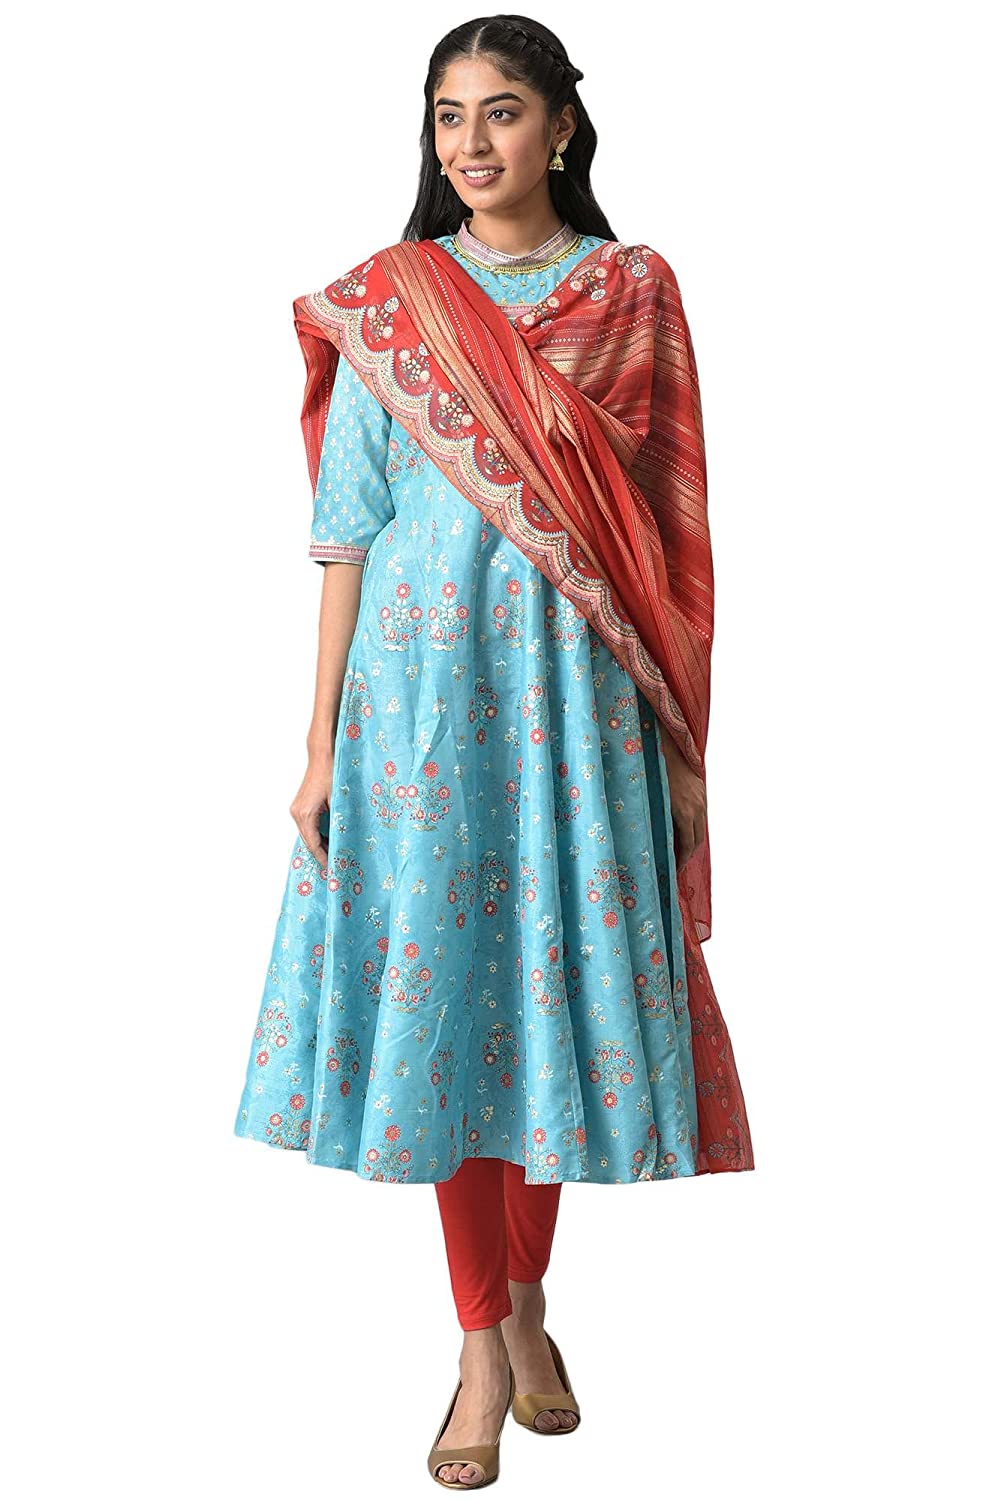 Women’s Polyester Floral Regular Blue Foil Kurta with Red Tights and Printed Dupatta